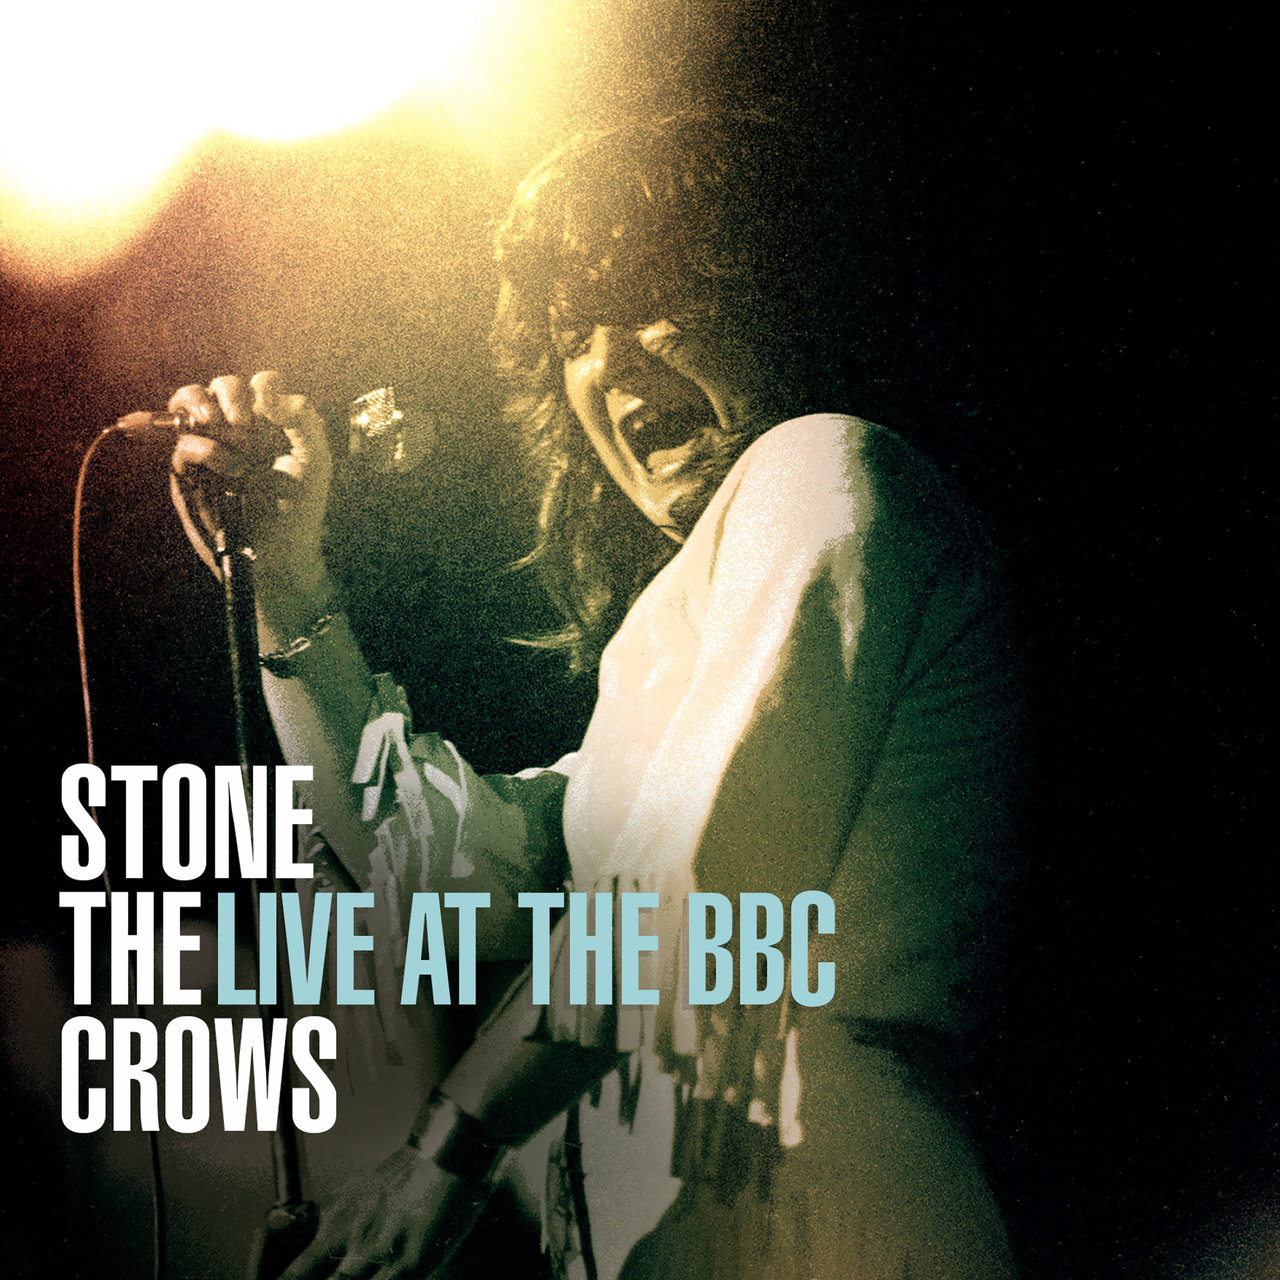 Stone The Crows - Live at the BBC [2022] cd4